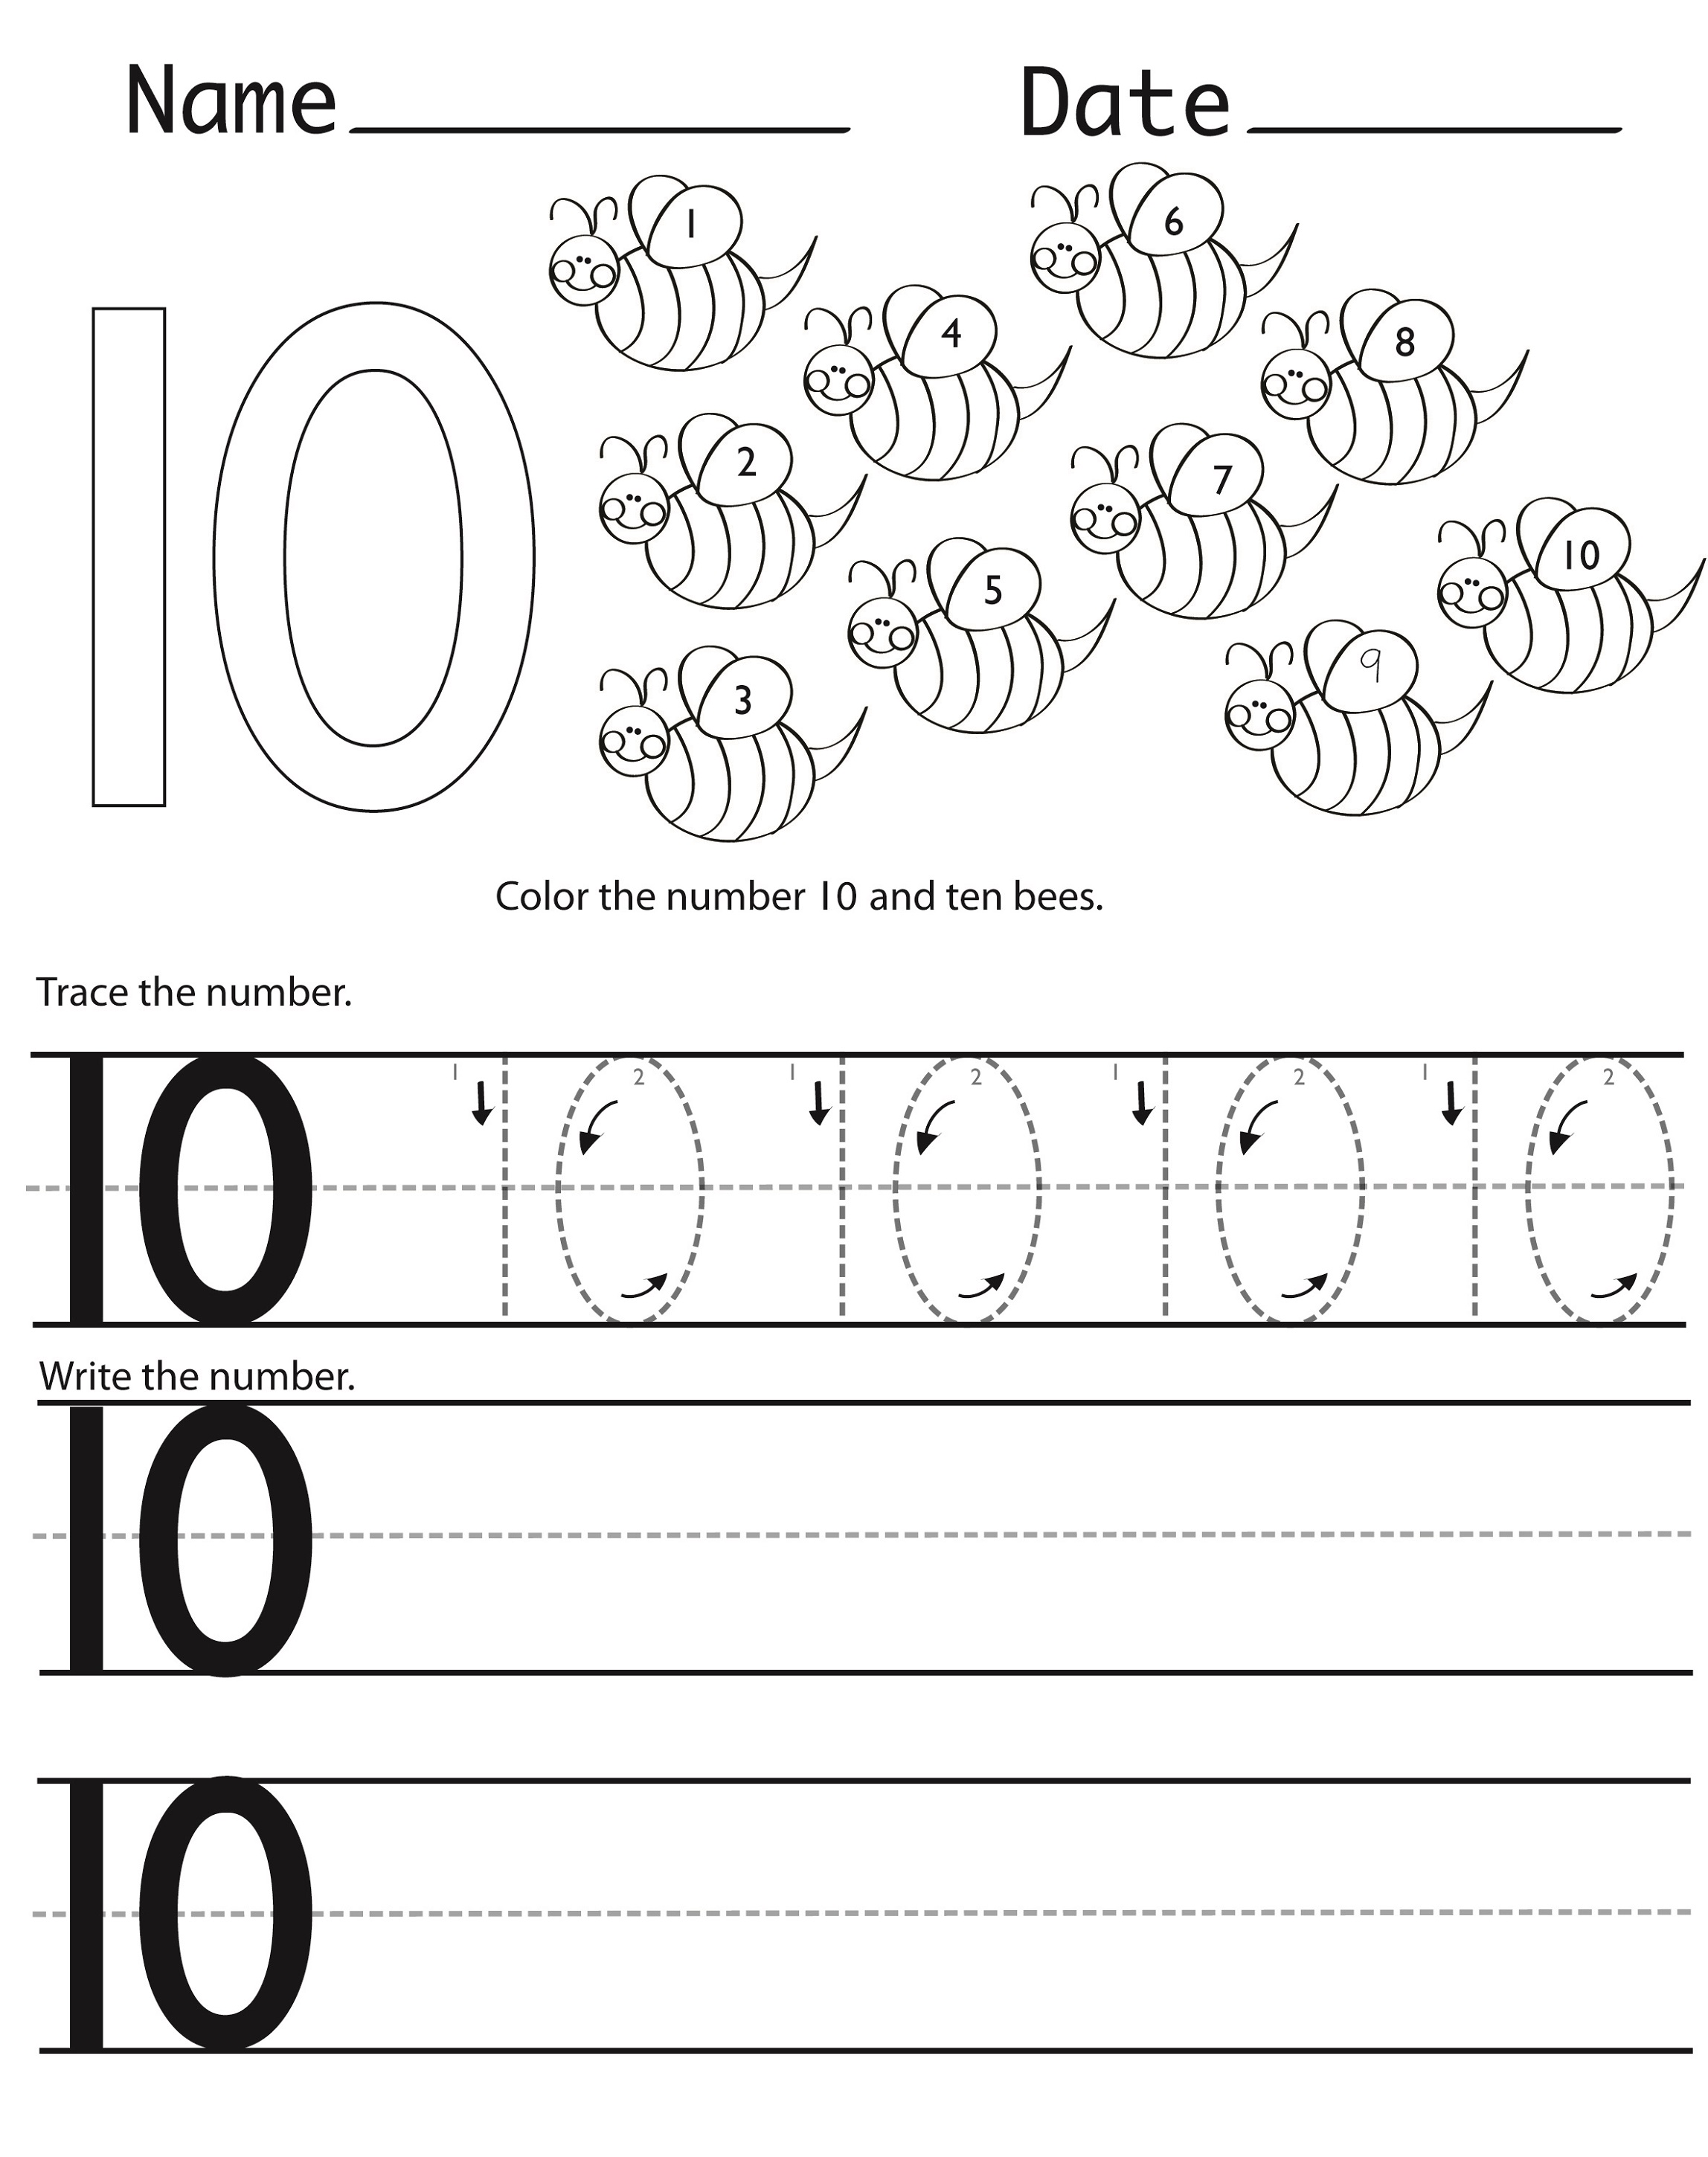 printable-number-10-printable-word-searches